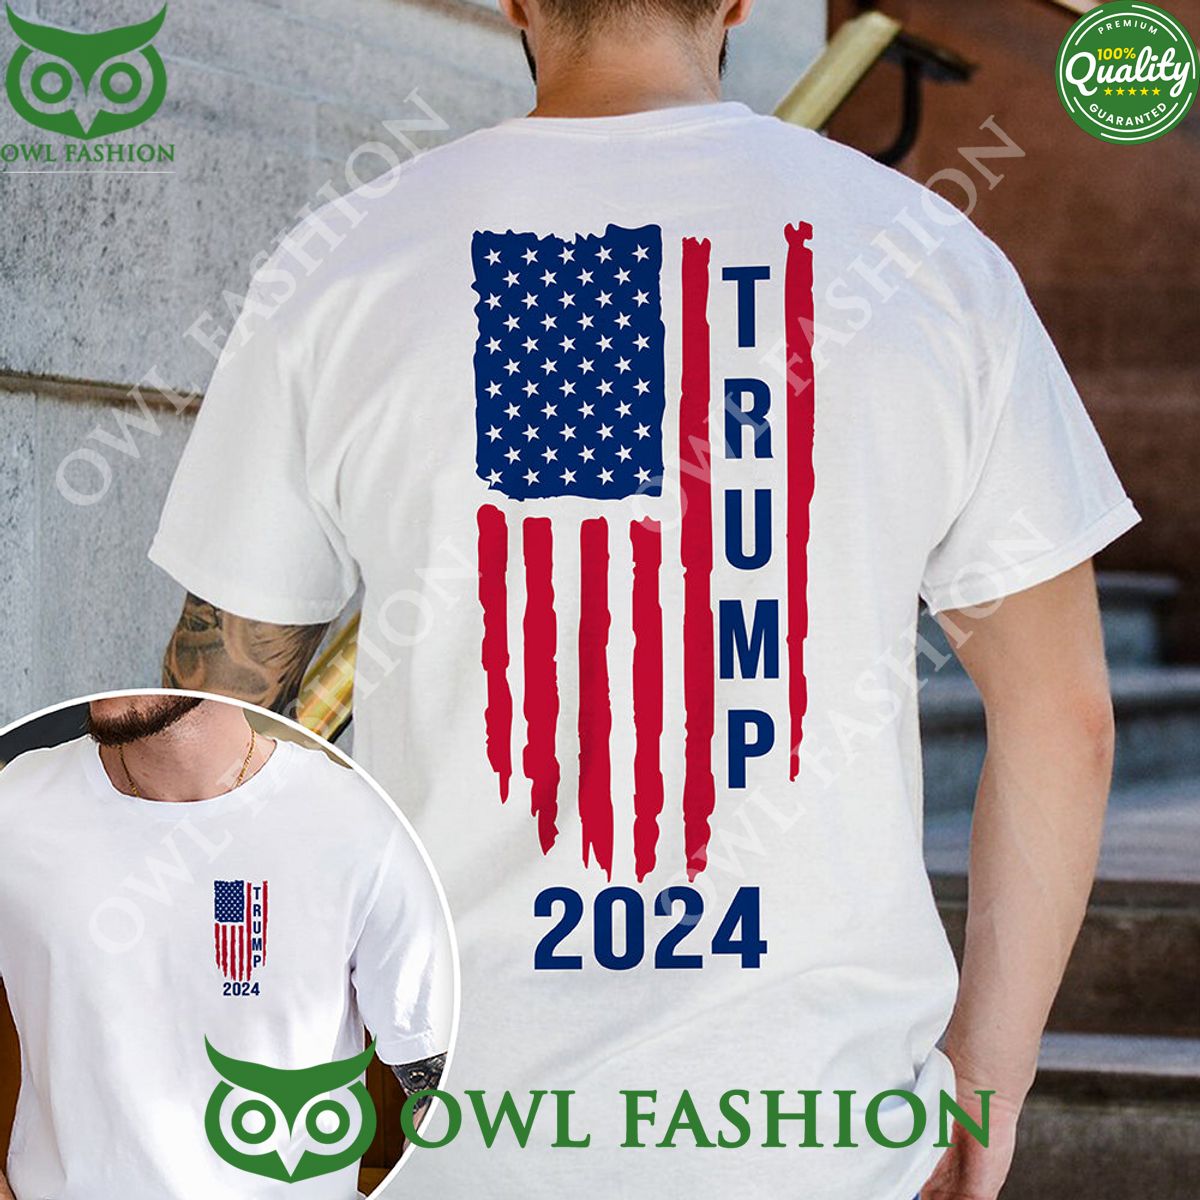 Trump 2024 With America Flag Premium Hoodie Shirt Eye soothing picture dear